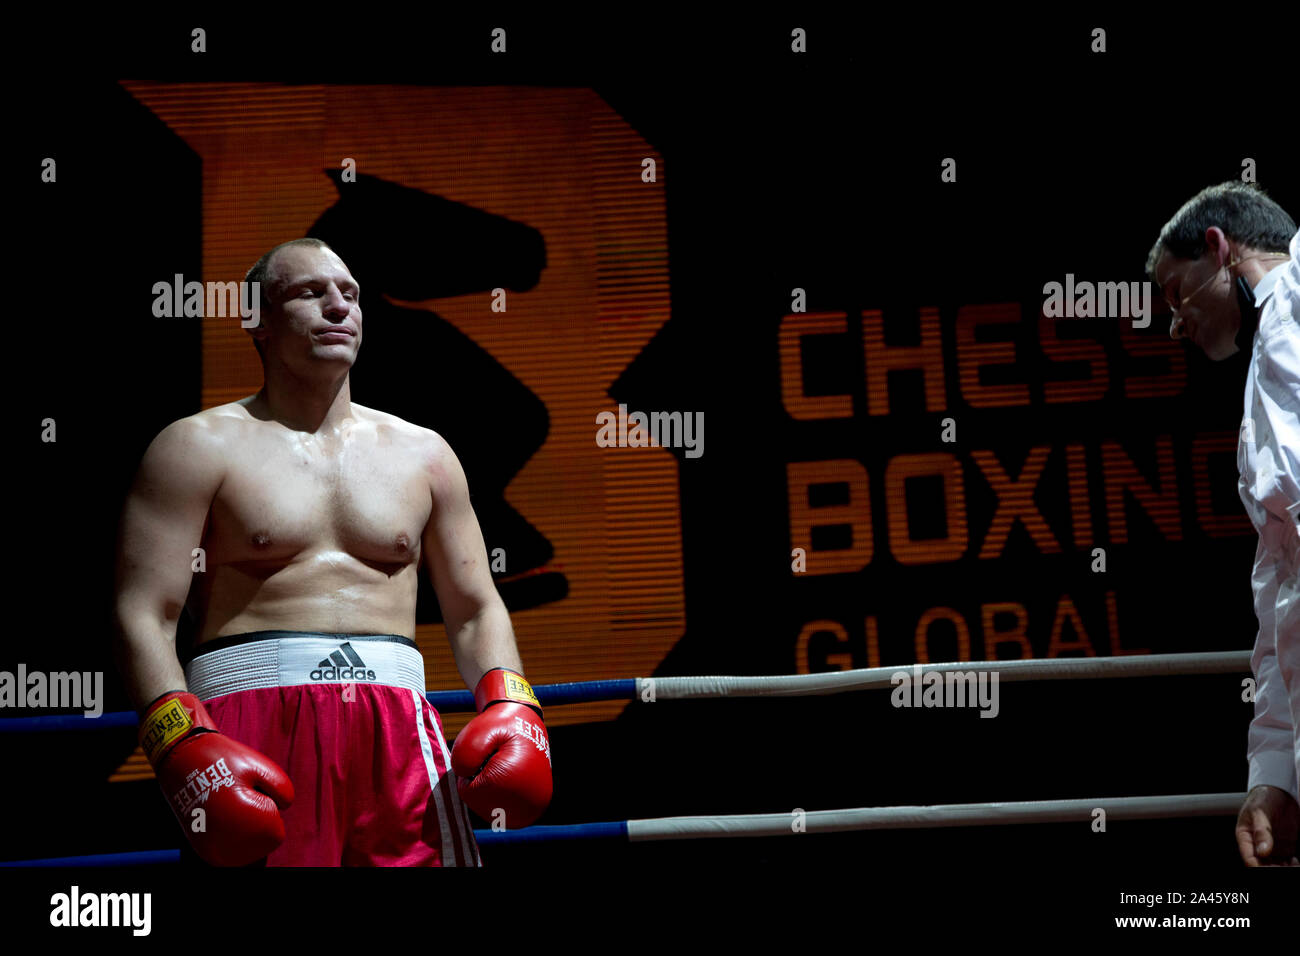 Moscow, Russia. 28th of November, 2013 Boxer Leonid Chernobaev from Belarus plays chess in the ring in the match of the World Chess Boxing Championship in Moscow, Russia Stock Photo